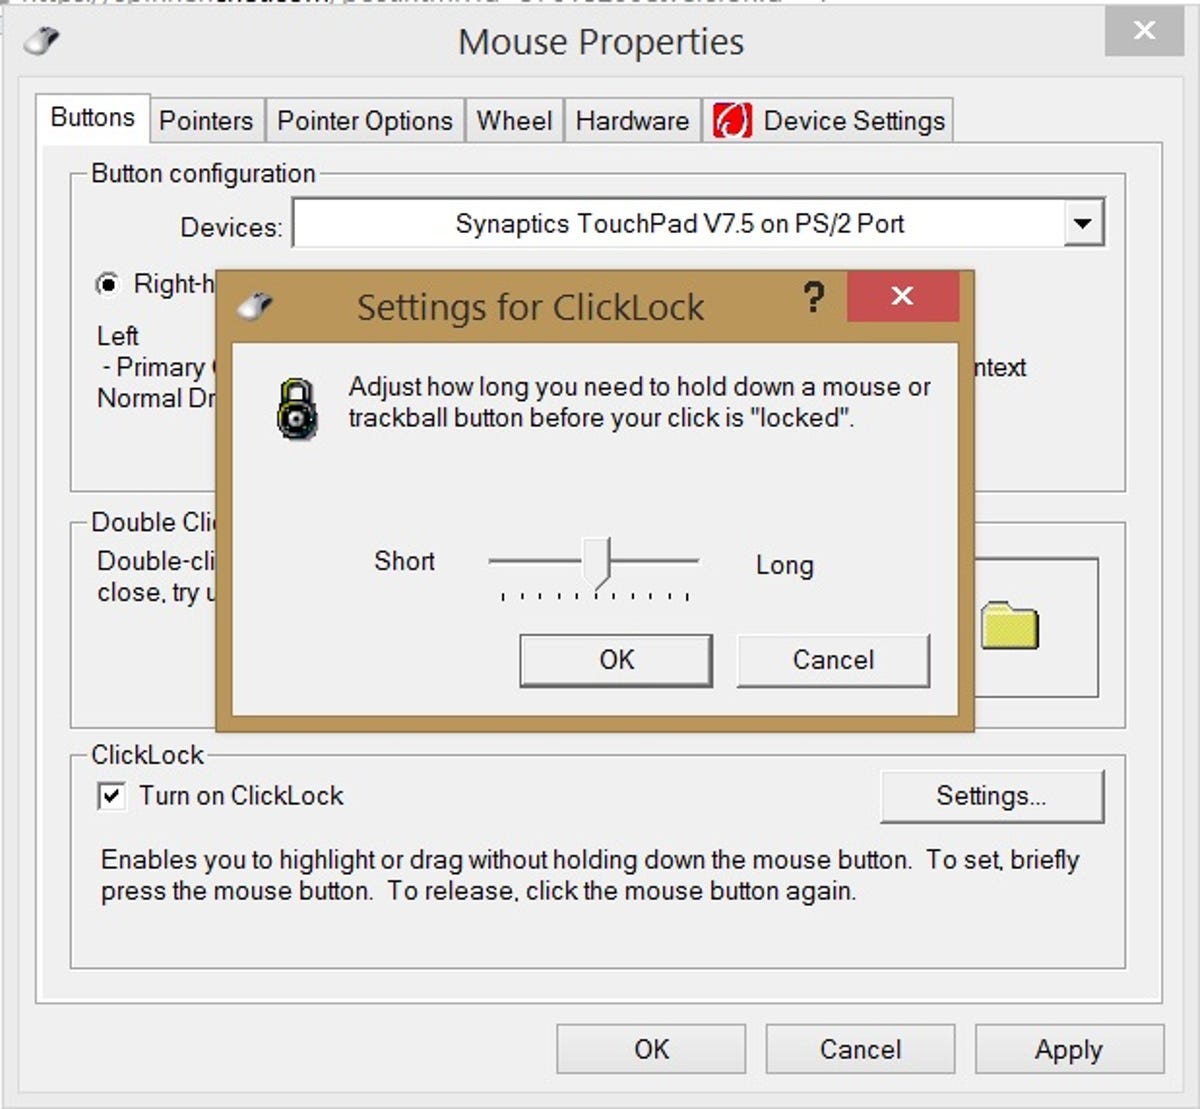 Windows 8.1 Mouse Properties ClickLock duration setting